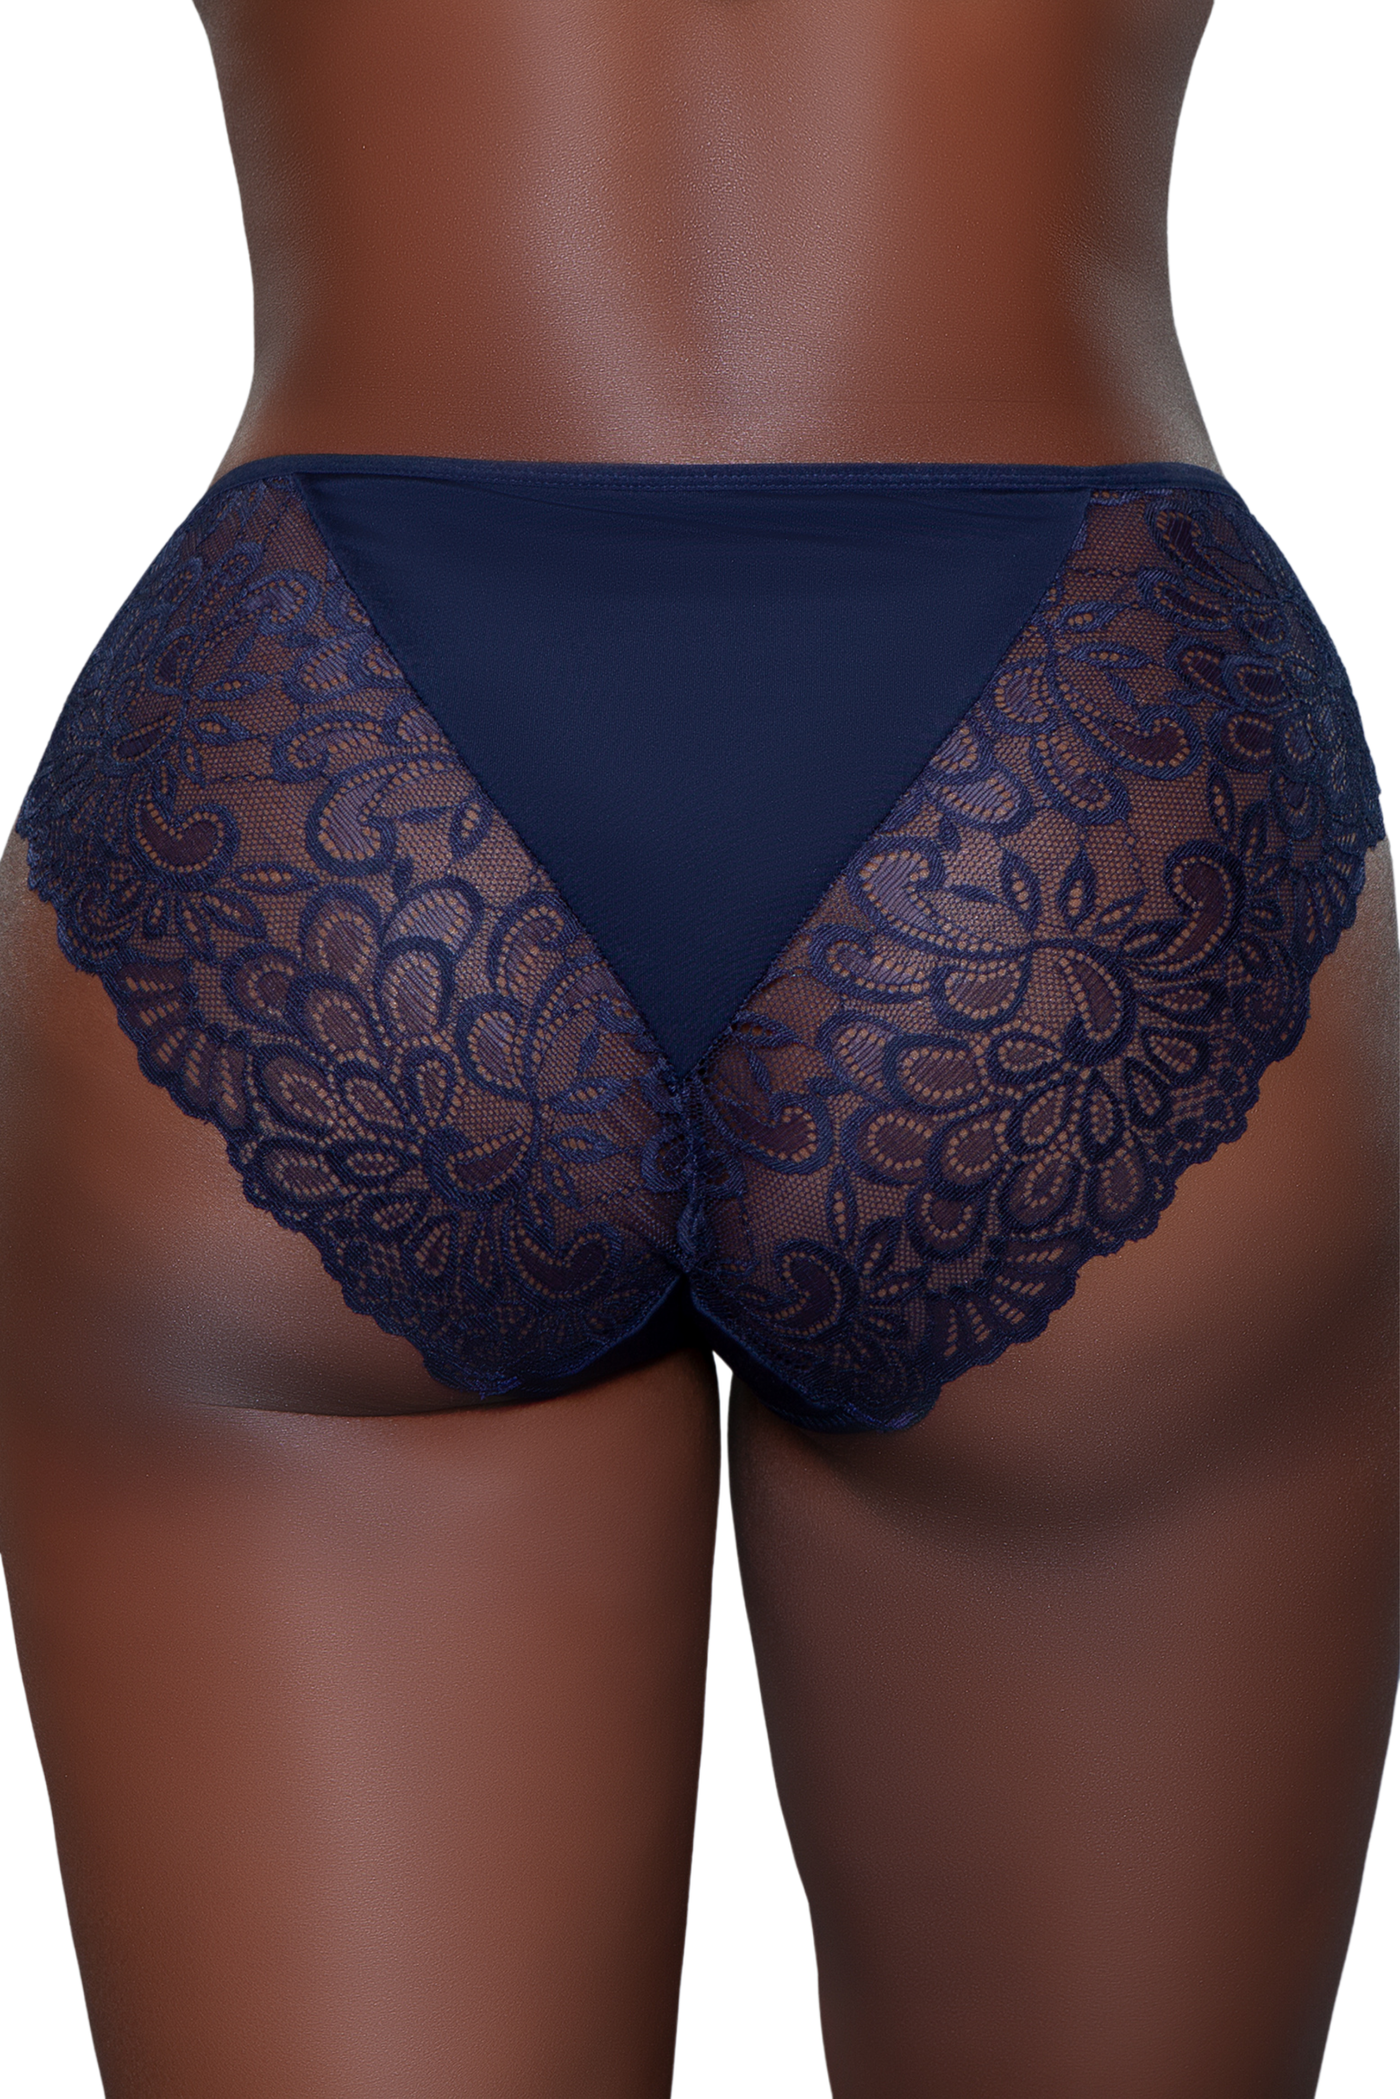 3pc. High-Rise Lace Brief Panties - For Love of Lingerie